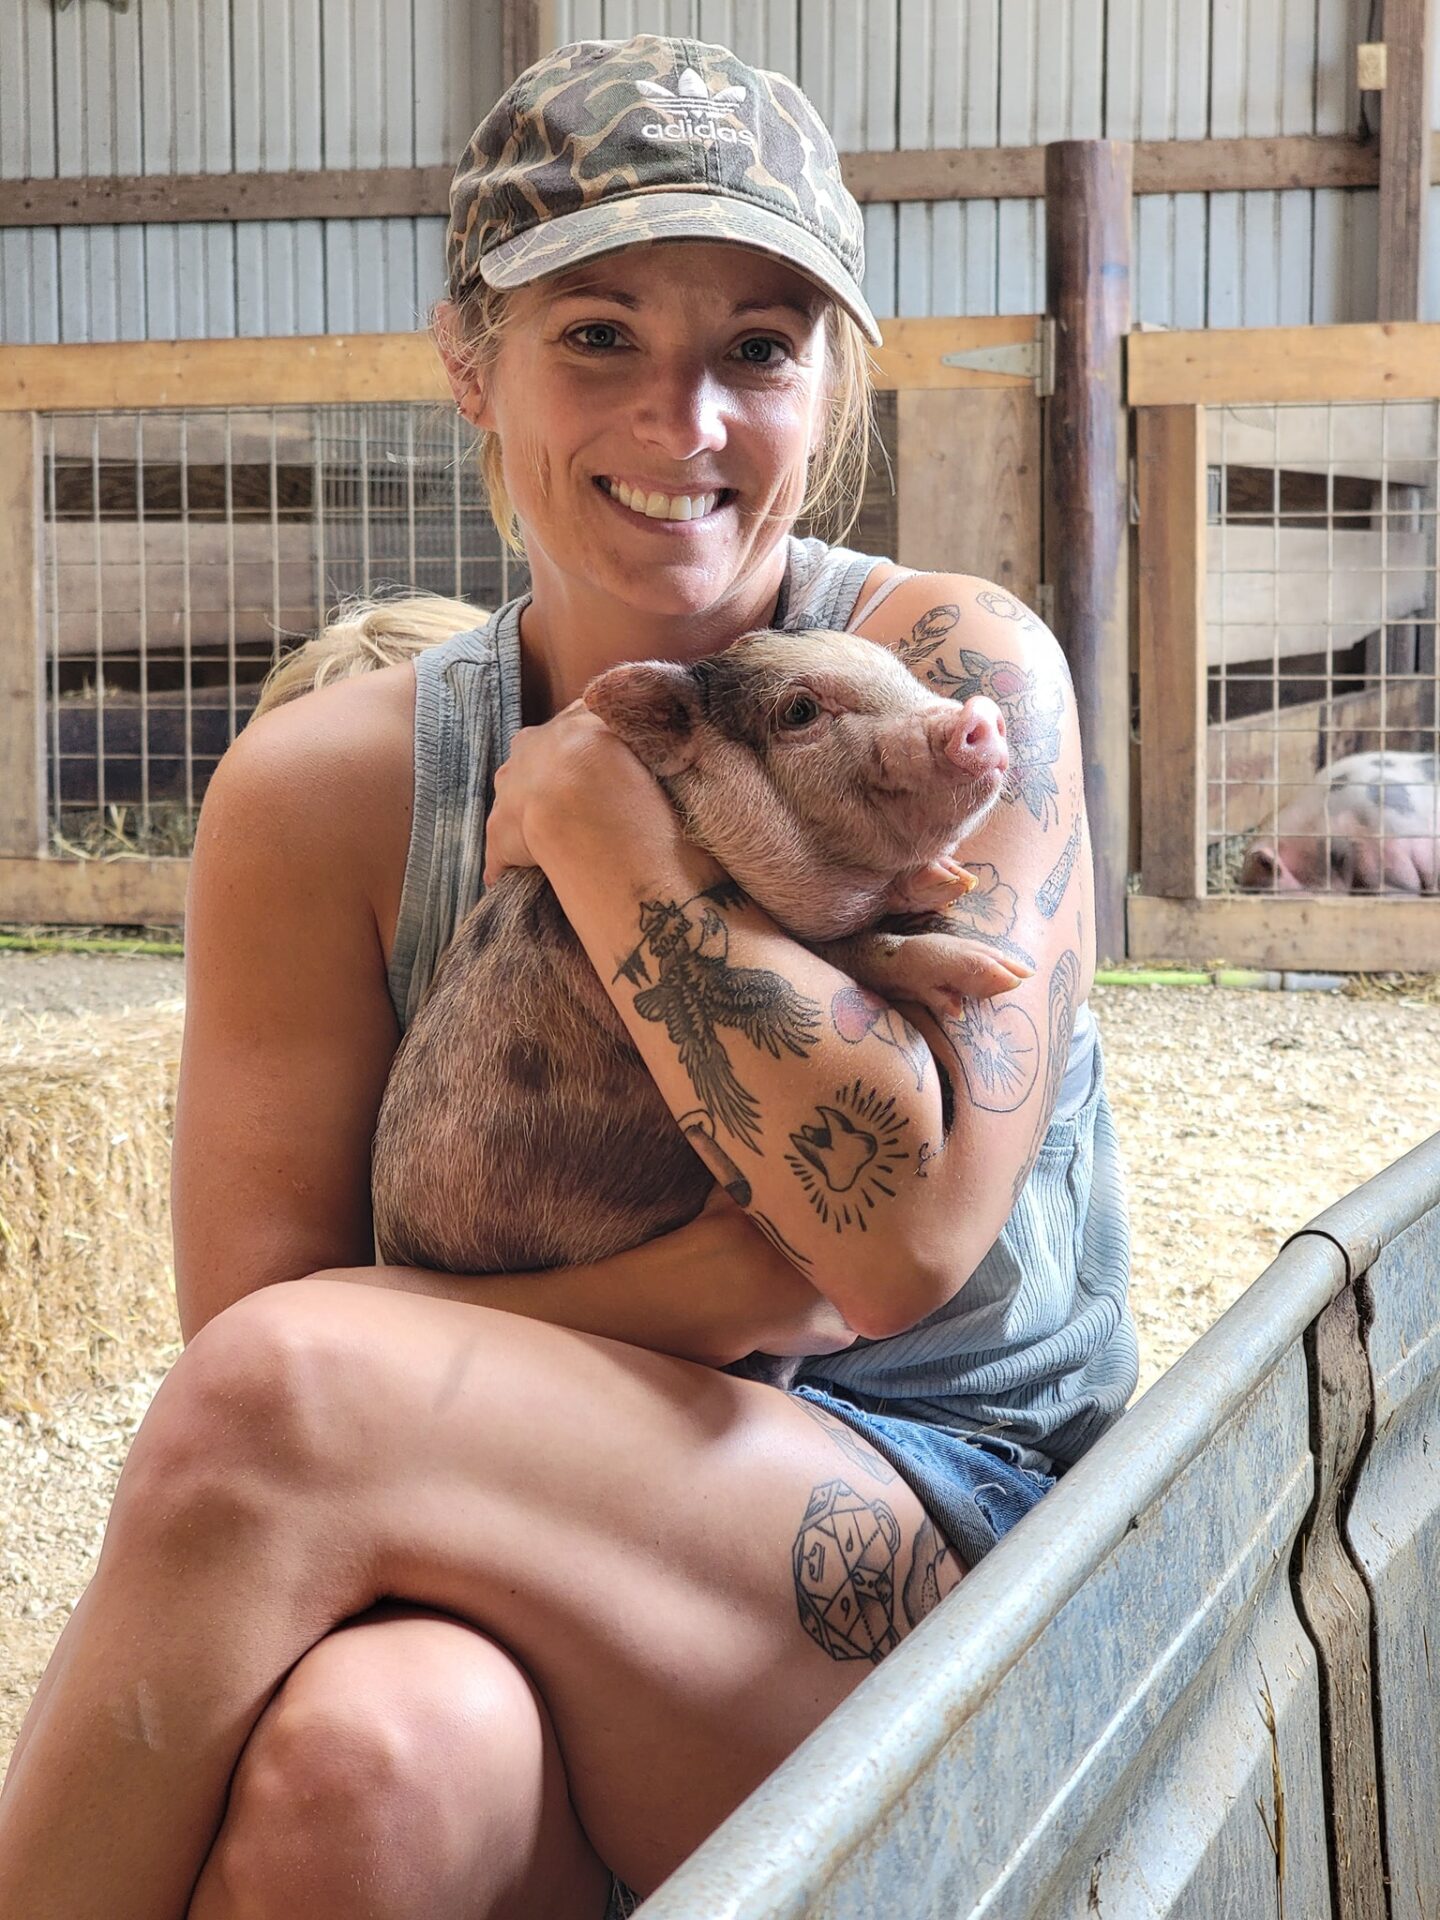 Lady Holding Piglet in Their Arm by a Shead